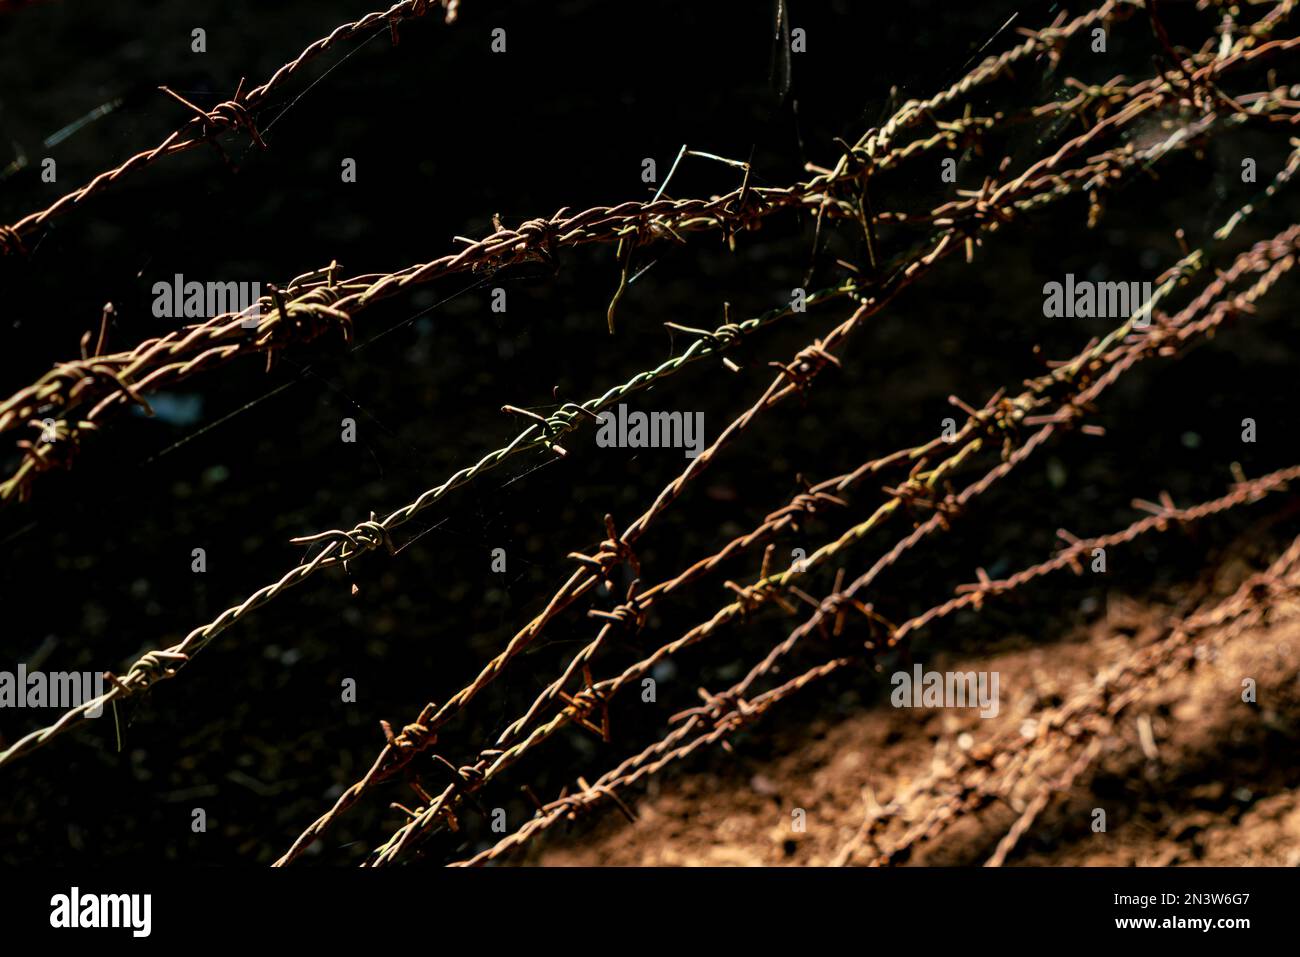 Rusty barb wire at old fence. Old barb wire fence against the dark ground Stock Photo